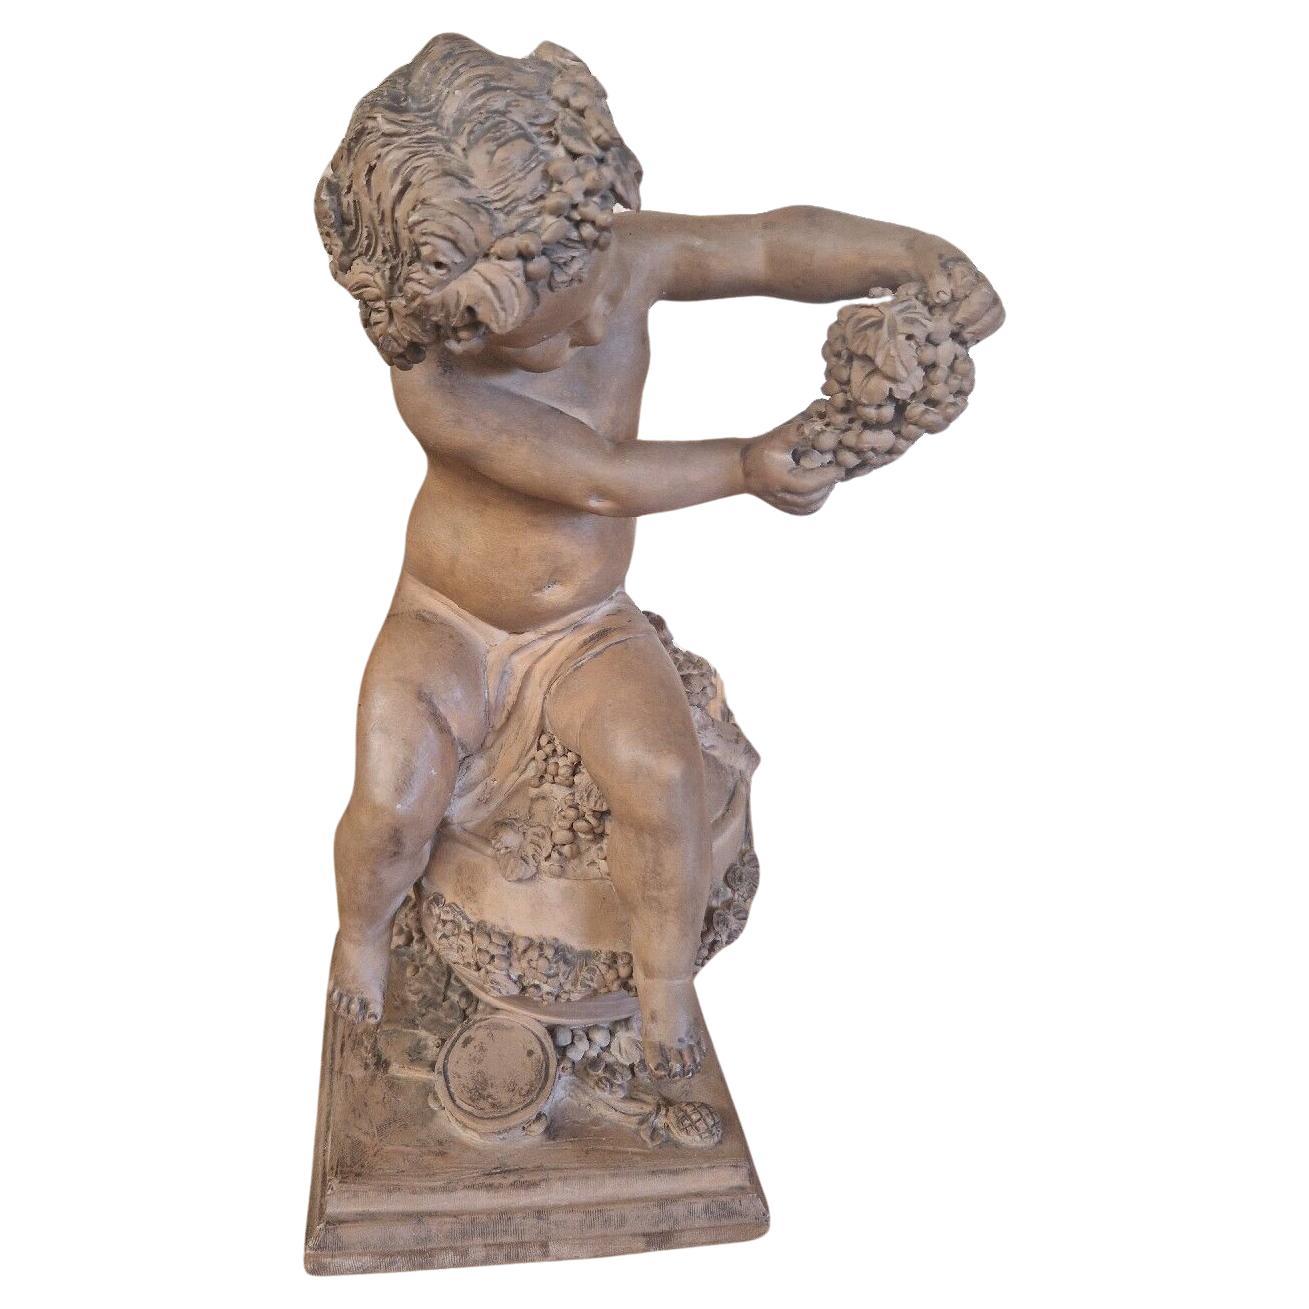 We are delighted to offer for sale this Beautiful Roman Style Sculpture

Statue of Young Bacchus - Greek God of Wine and Harvest

Signature to base FAGUI

Terracotta

Nice Patina

French Origin

Beautiful Carved Details

Unique